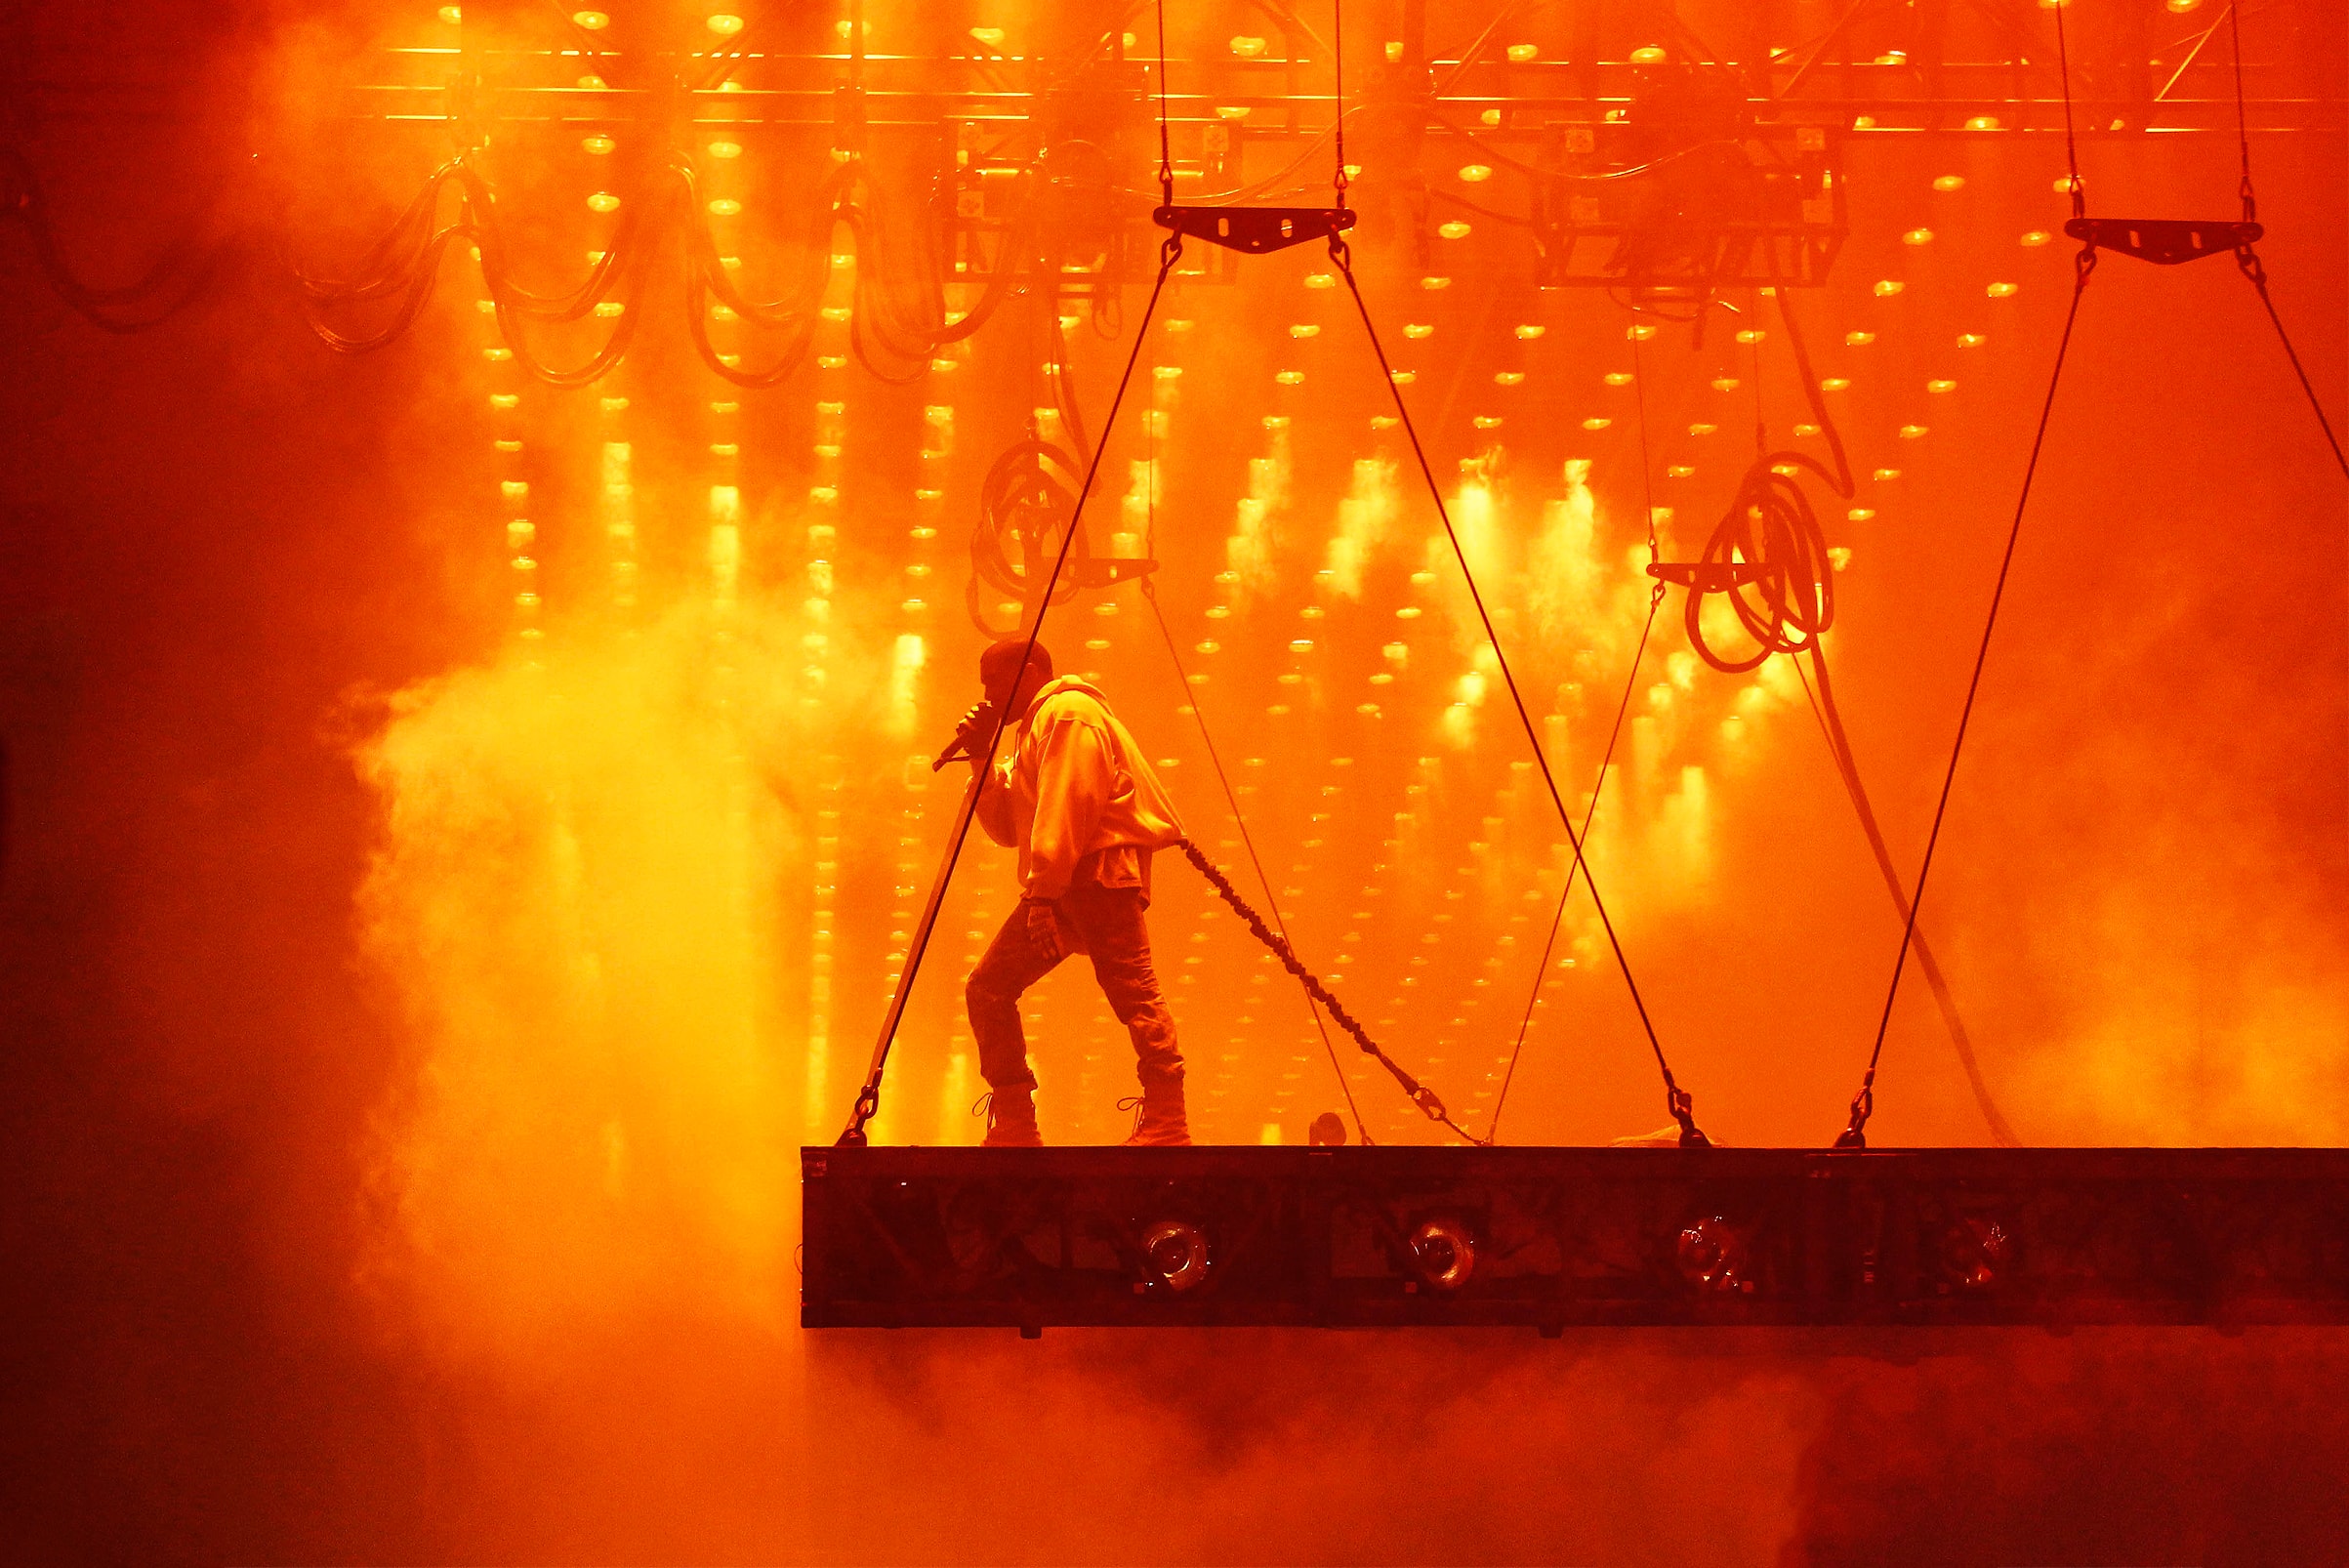 Kanye West Tour Stage Design Timeline Guide College Dropout Touch The Sky Glow In The Dark Watch the Throne Yeezus Saint Pablo